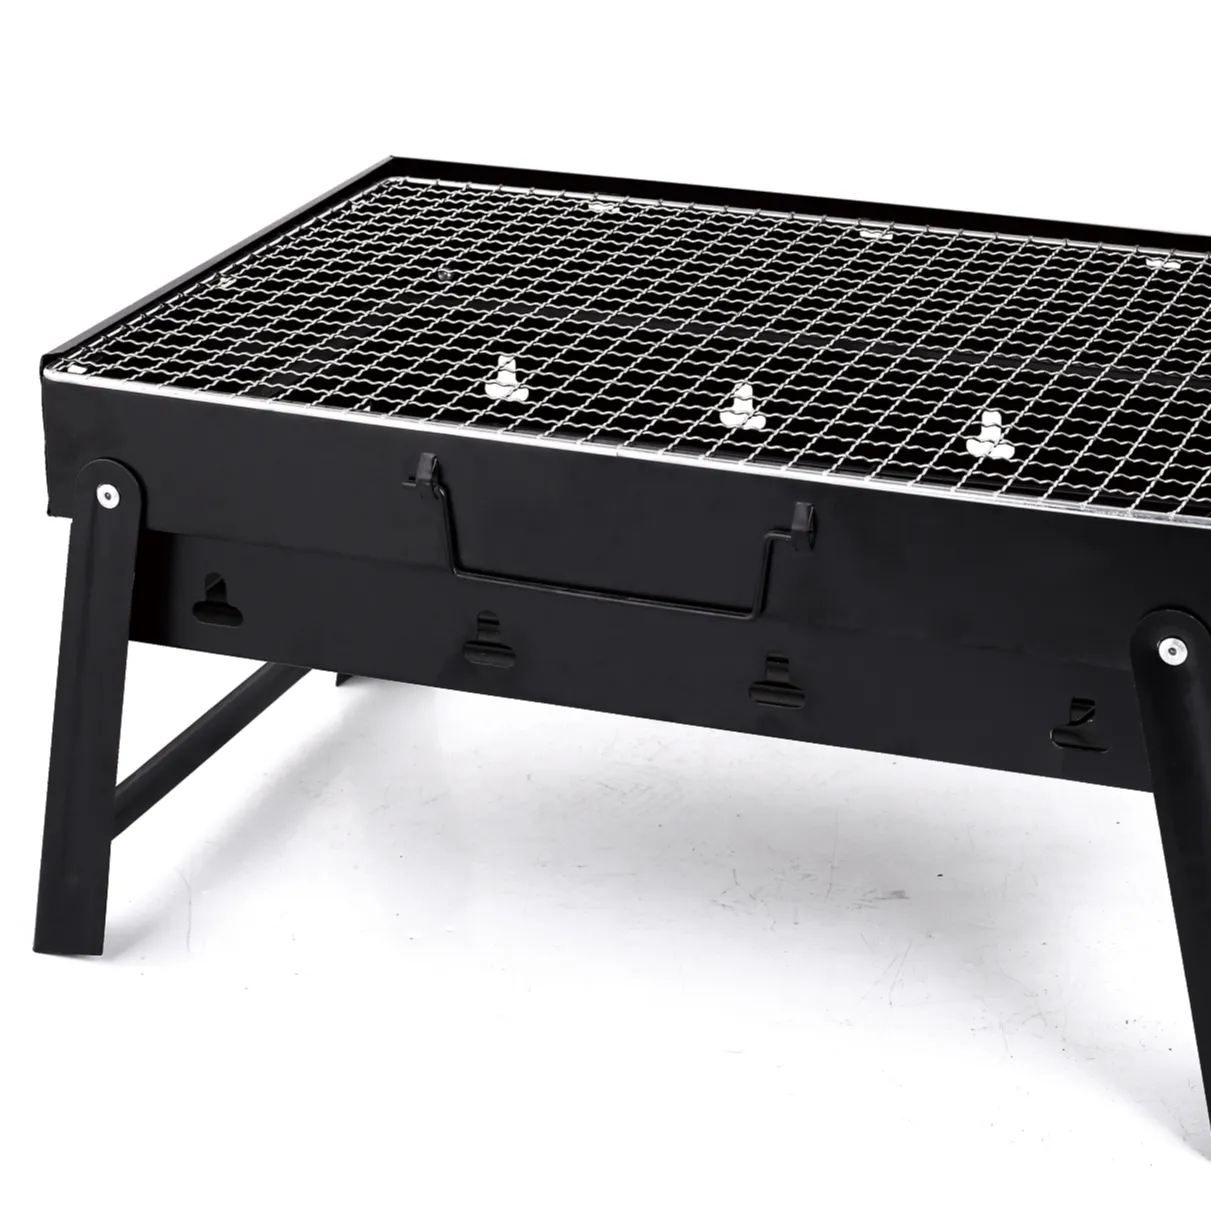 Small black steel The legs of the grill can be folded There are two planks in the grill